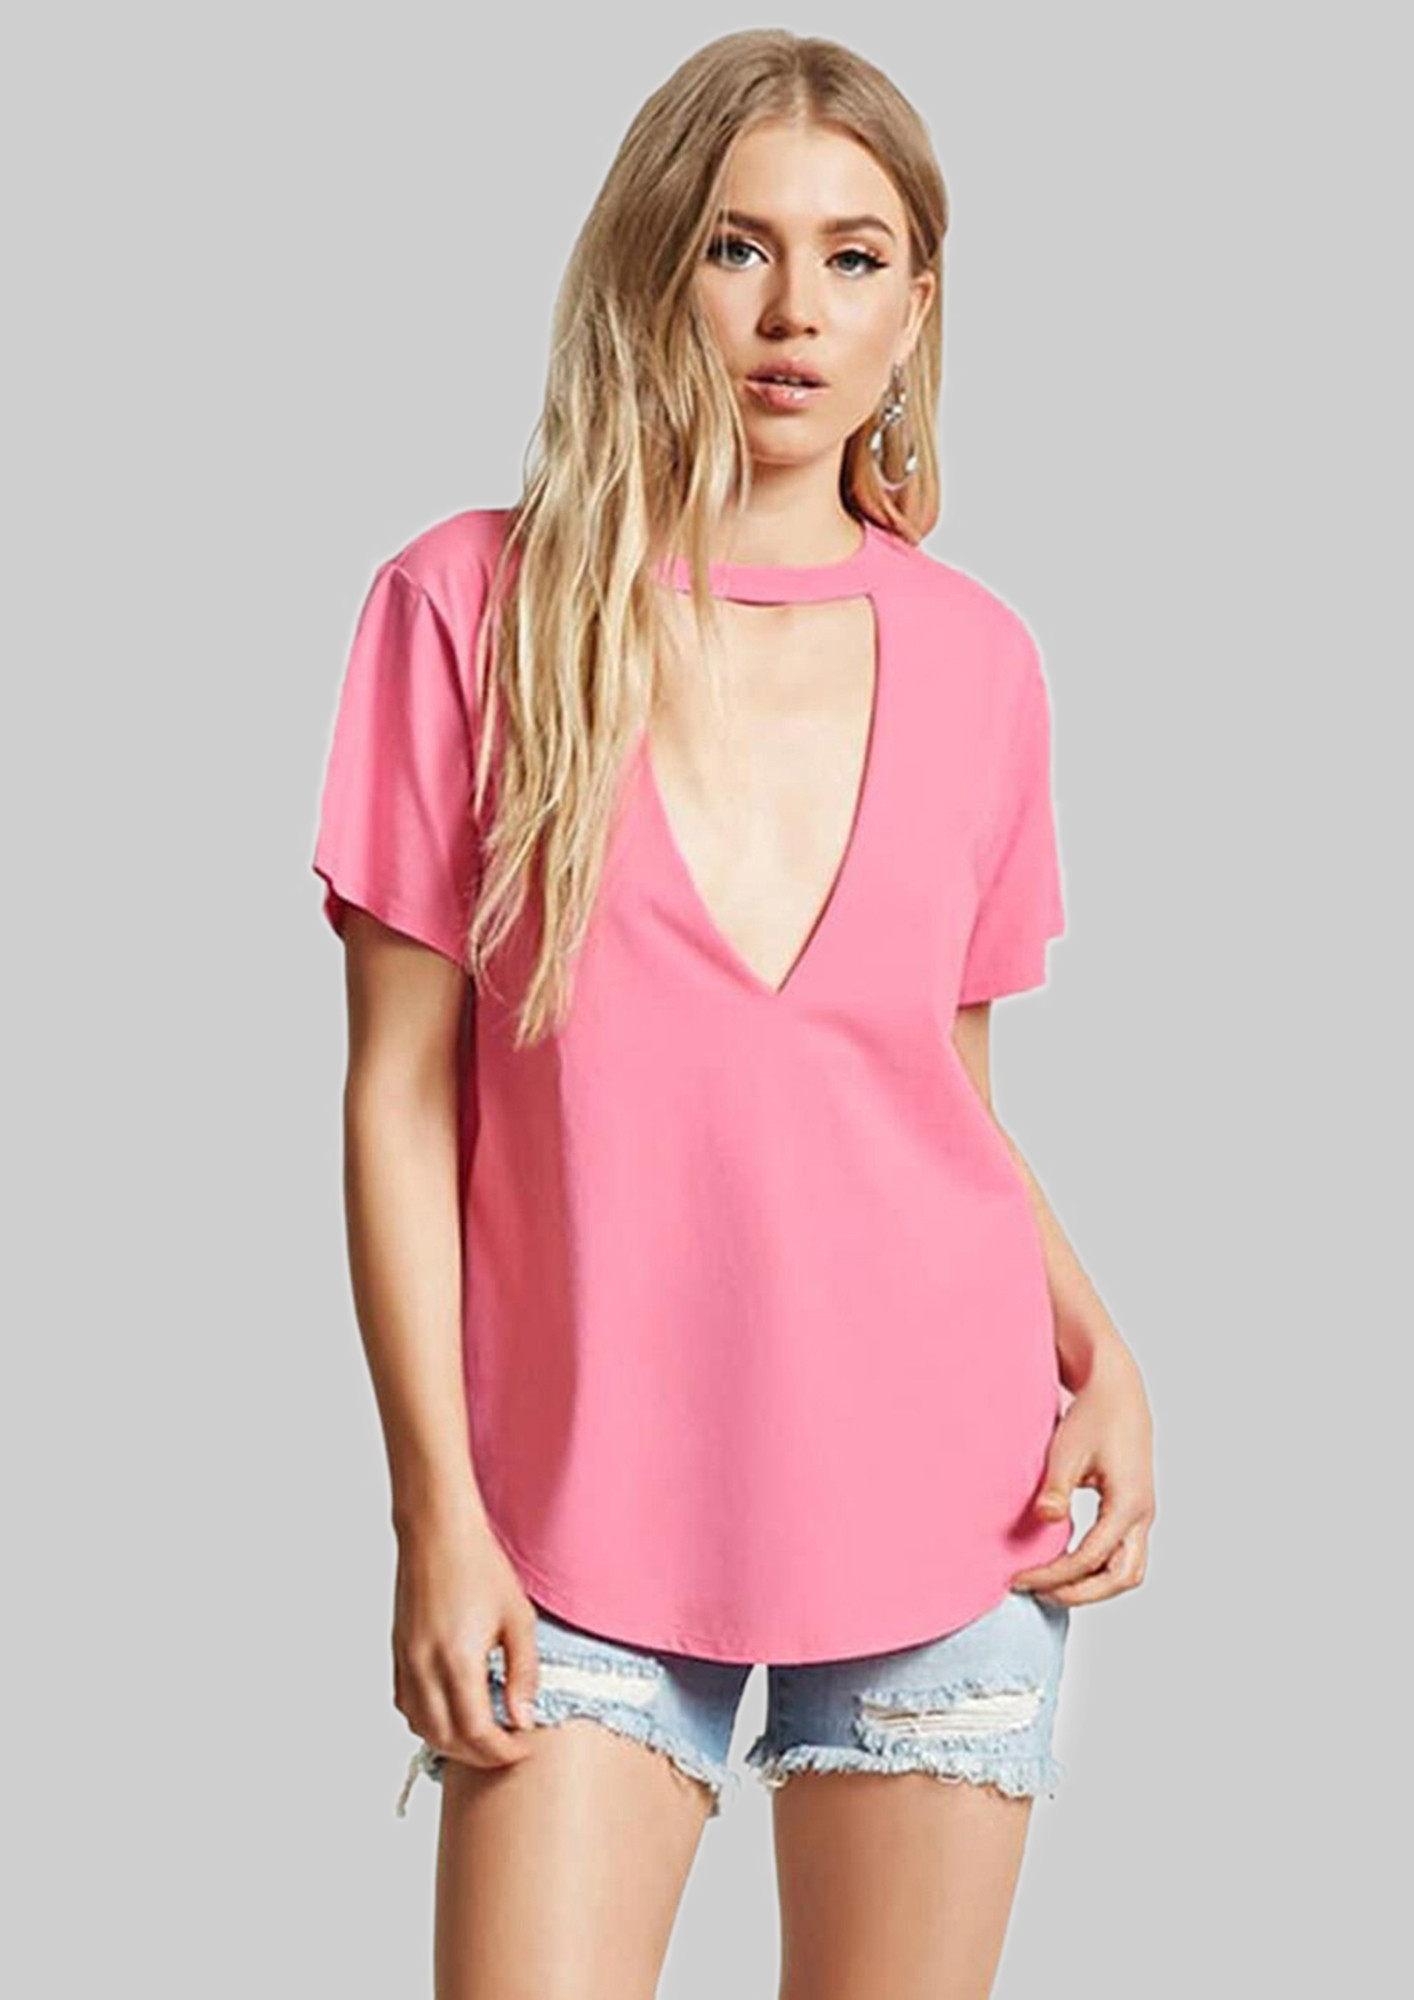 CLASSIC PLUNGING CHOKER NECK SOLID PINK T-SHIRT